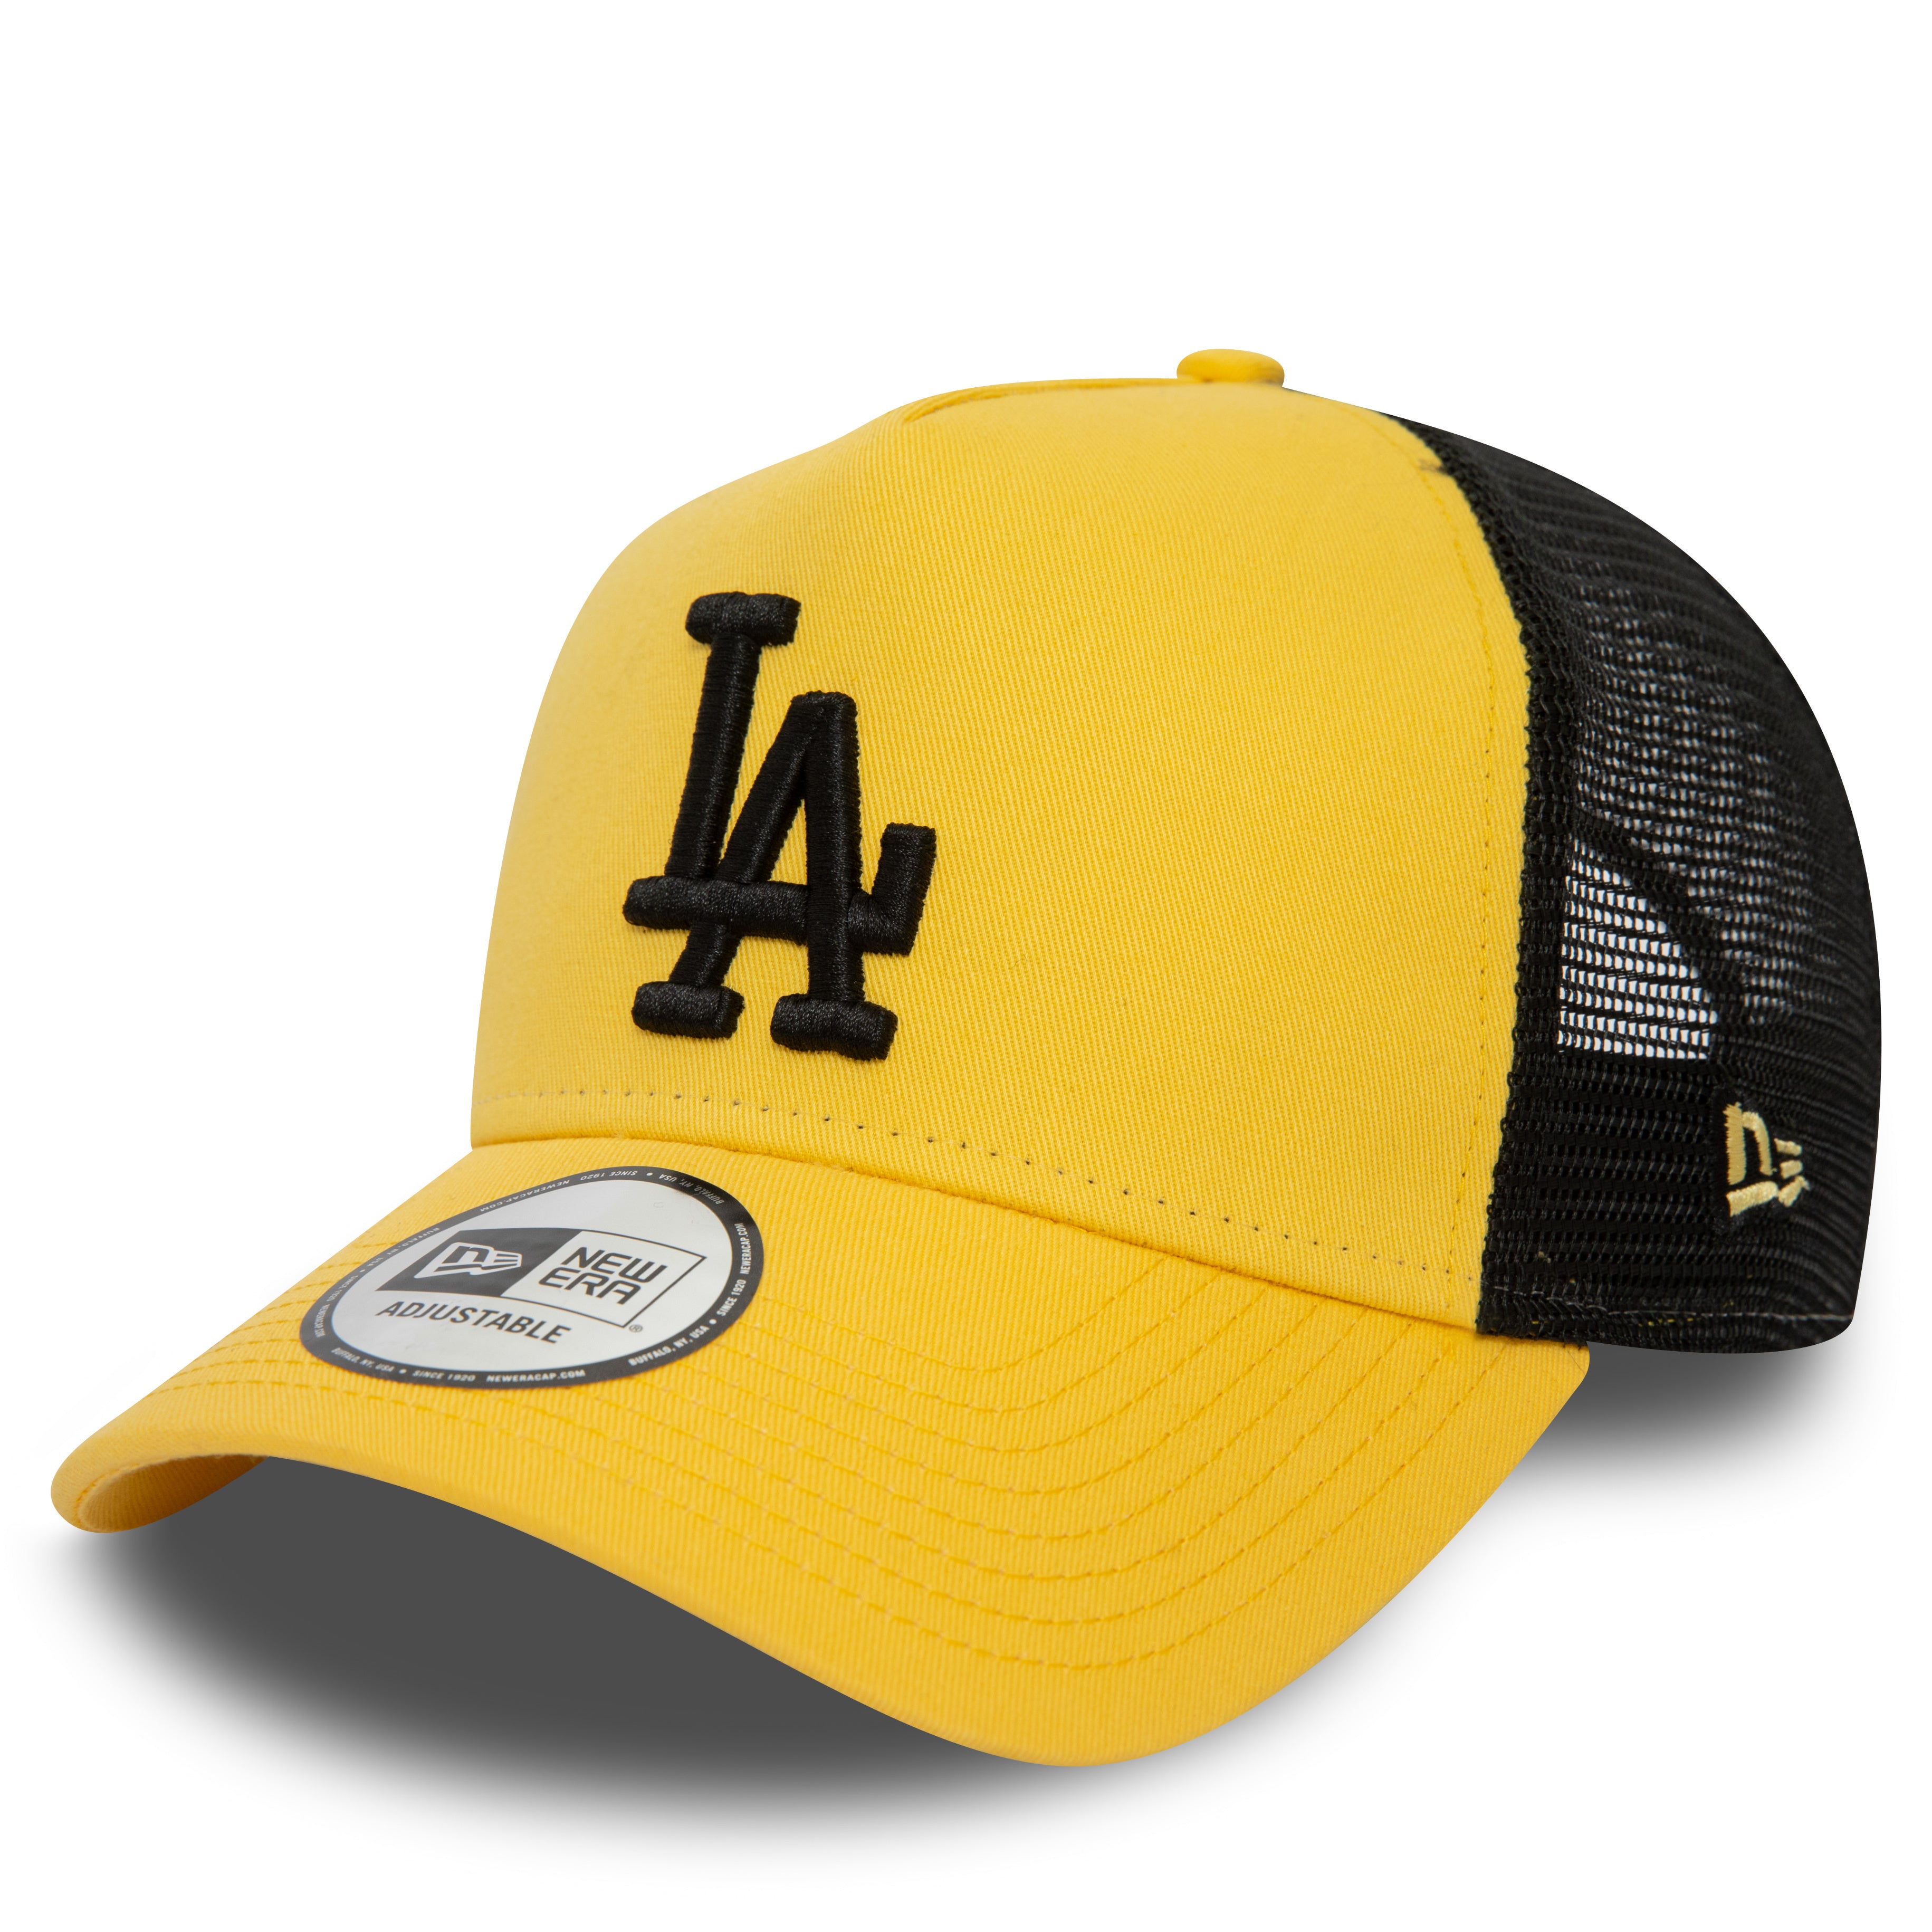 NEW ERA 9FORTY MLB LEAGUE ESSENTIAL LOS ANGELES DODGERS A-FRAME YELLOW TRUCKER